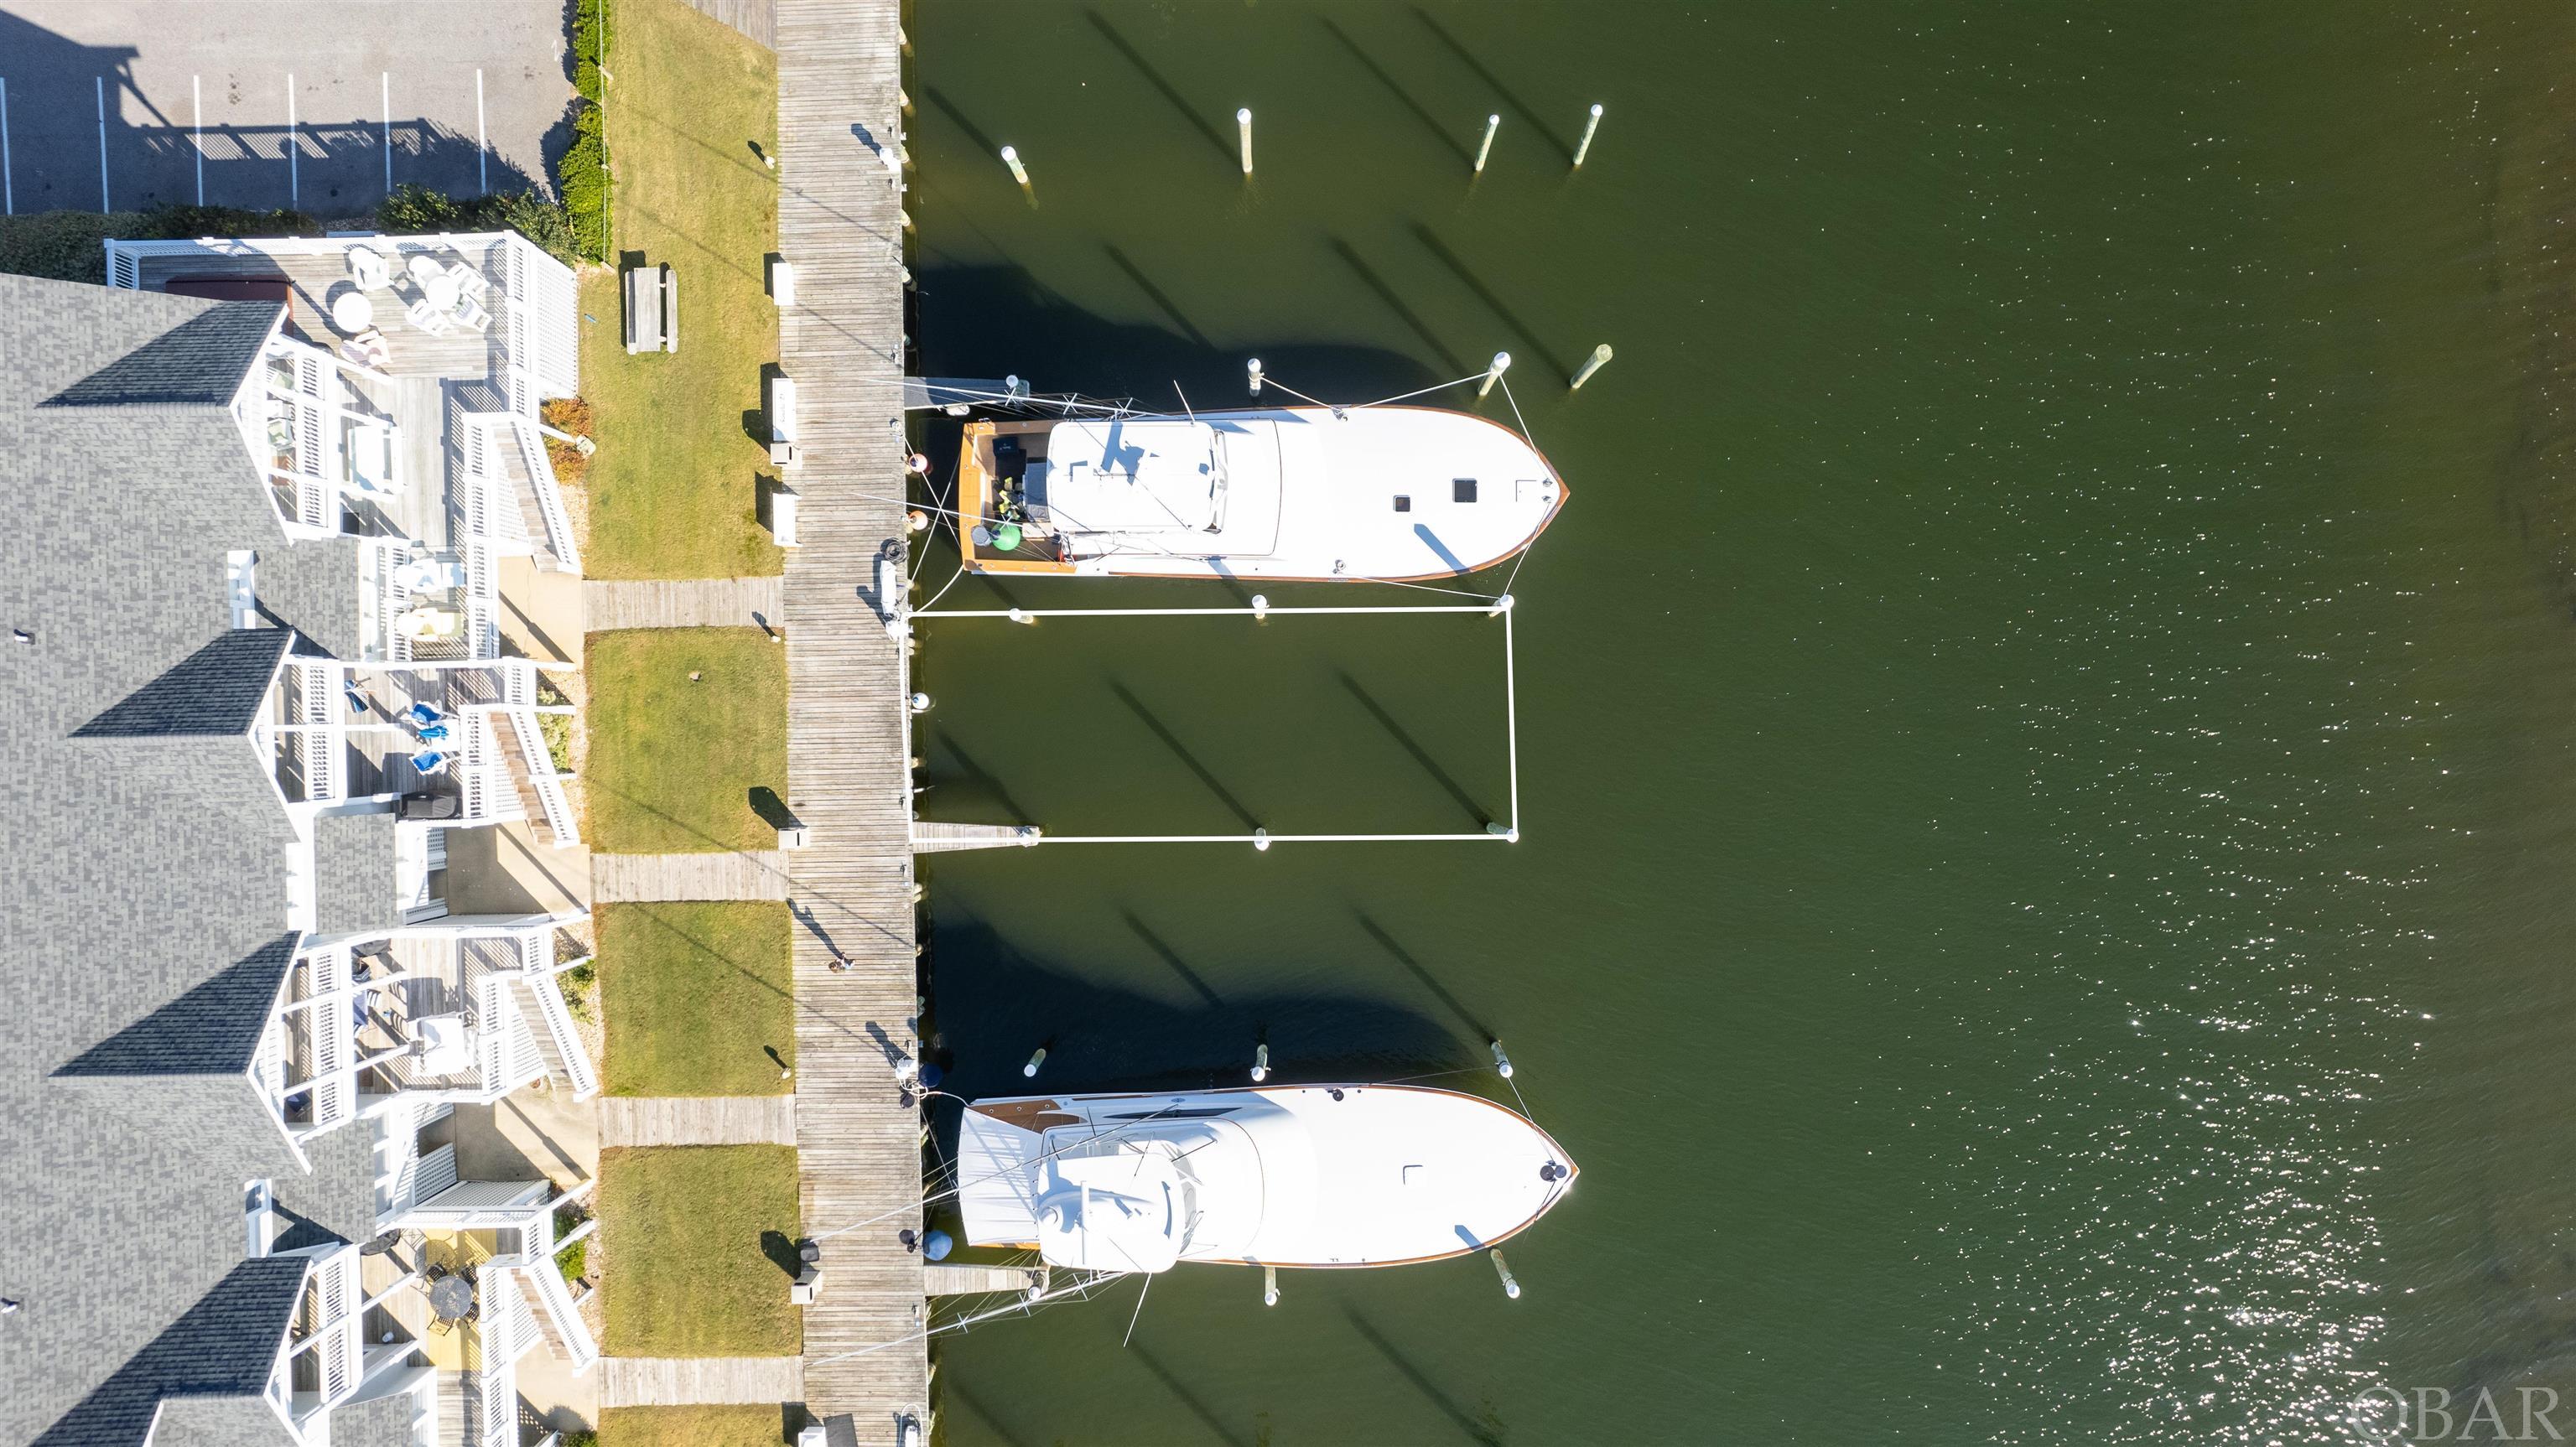 65x 20 foot boat slip on F Dock (can accommodate a 70 foot boat). Convenient to parking and close to fish cleaning station. Pirate's Cove Offers in slip diesel fueling.  Walk to the ships Store, tiki hut or Bluewater Restaurant.  Condo 203 Sailfish Drive is also for sale MLS#